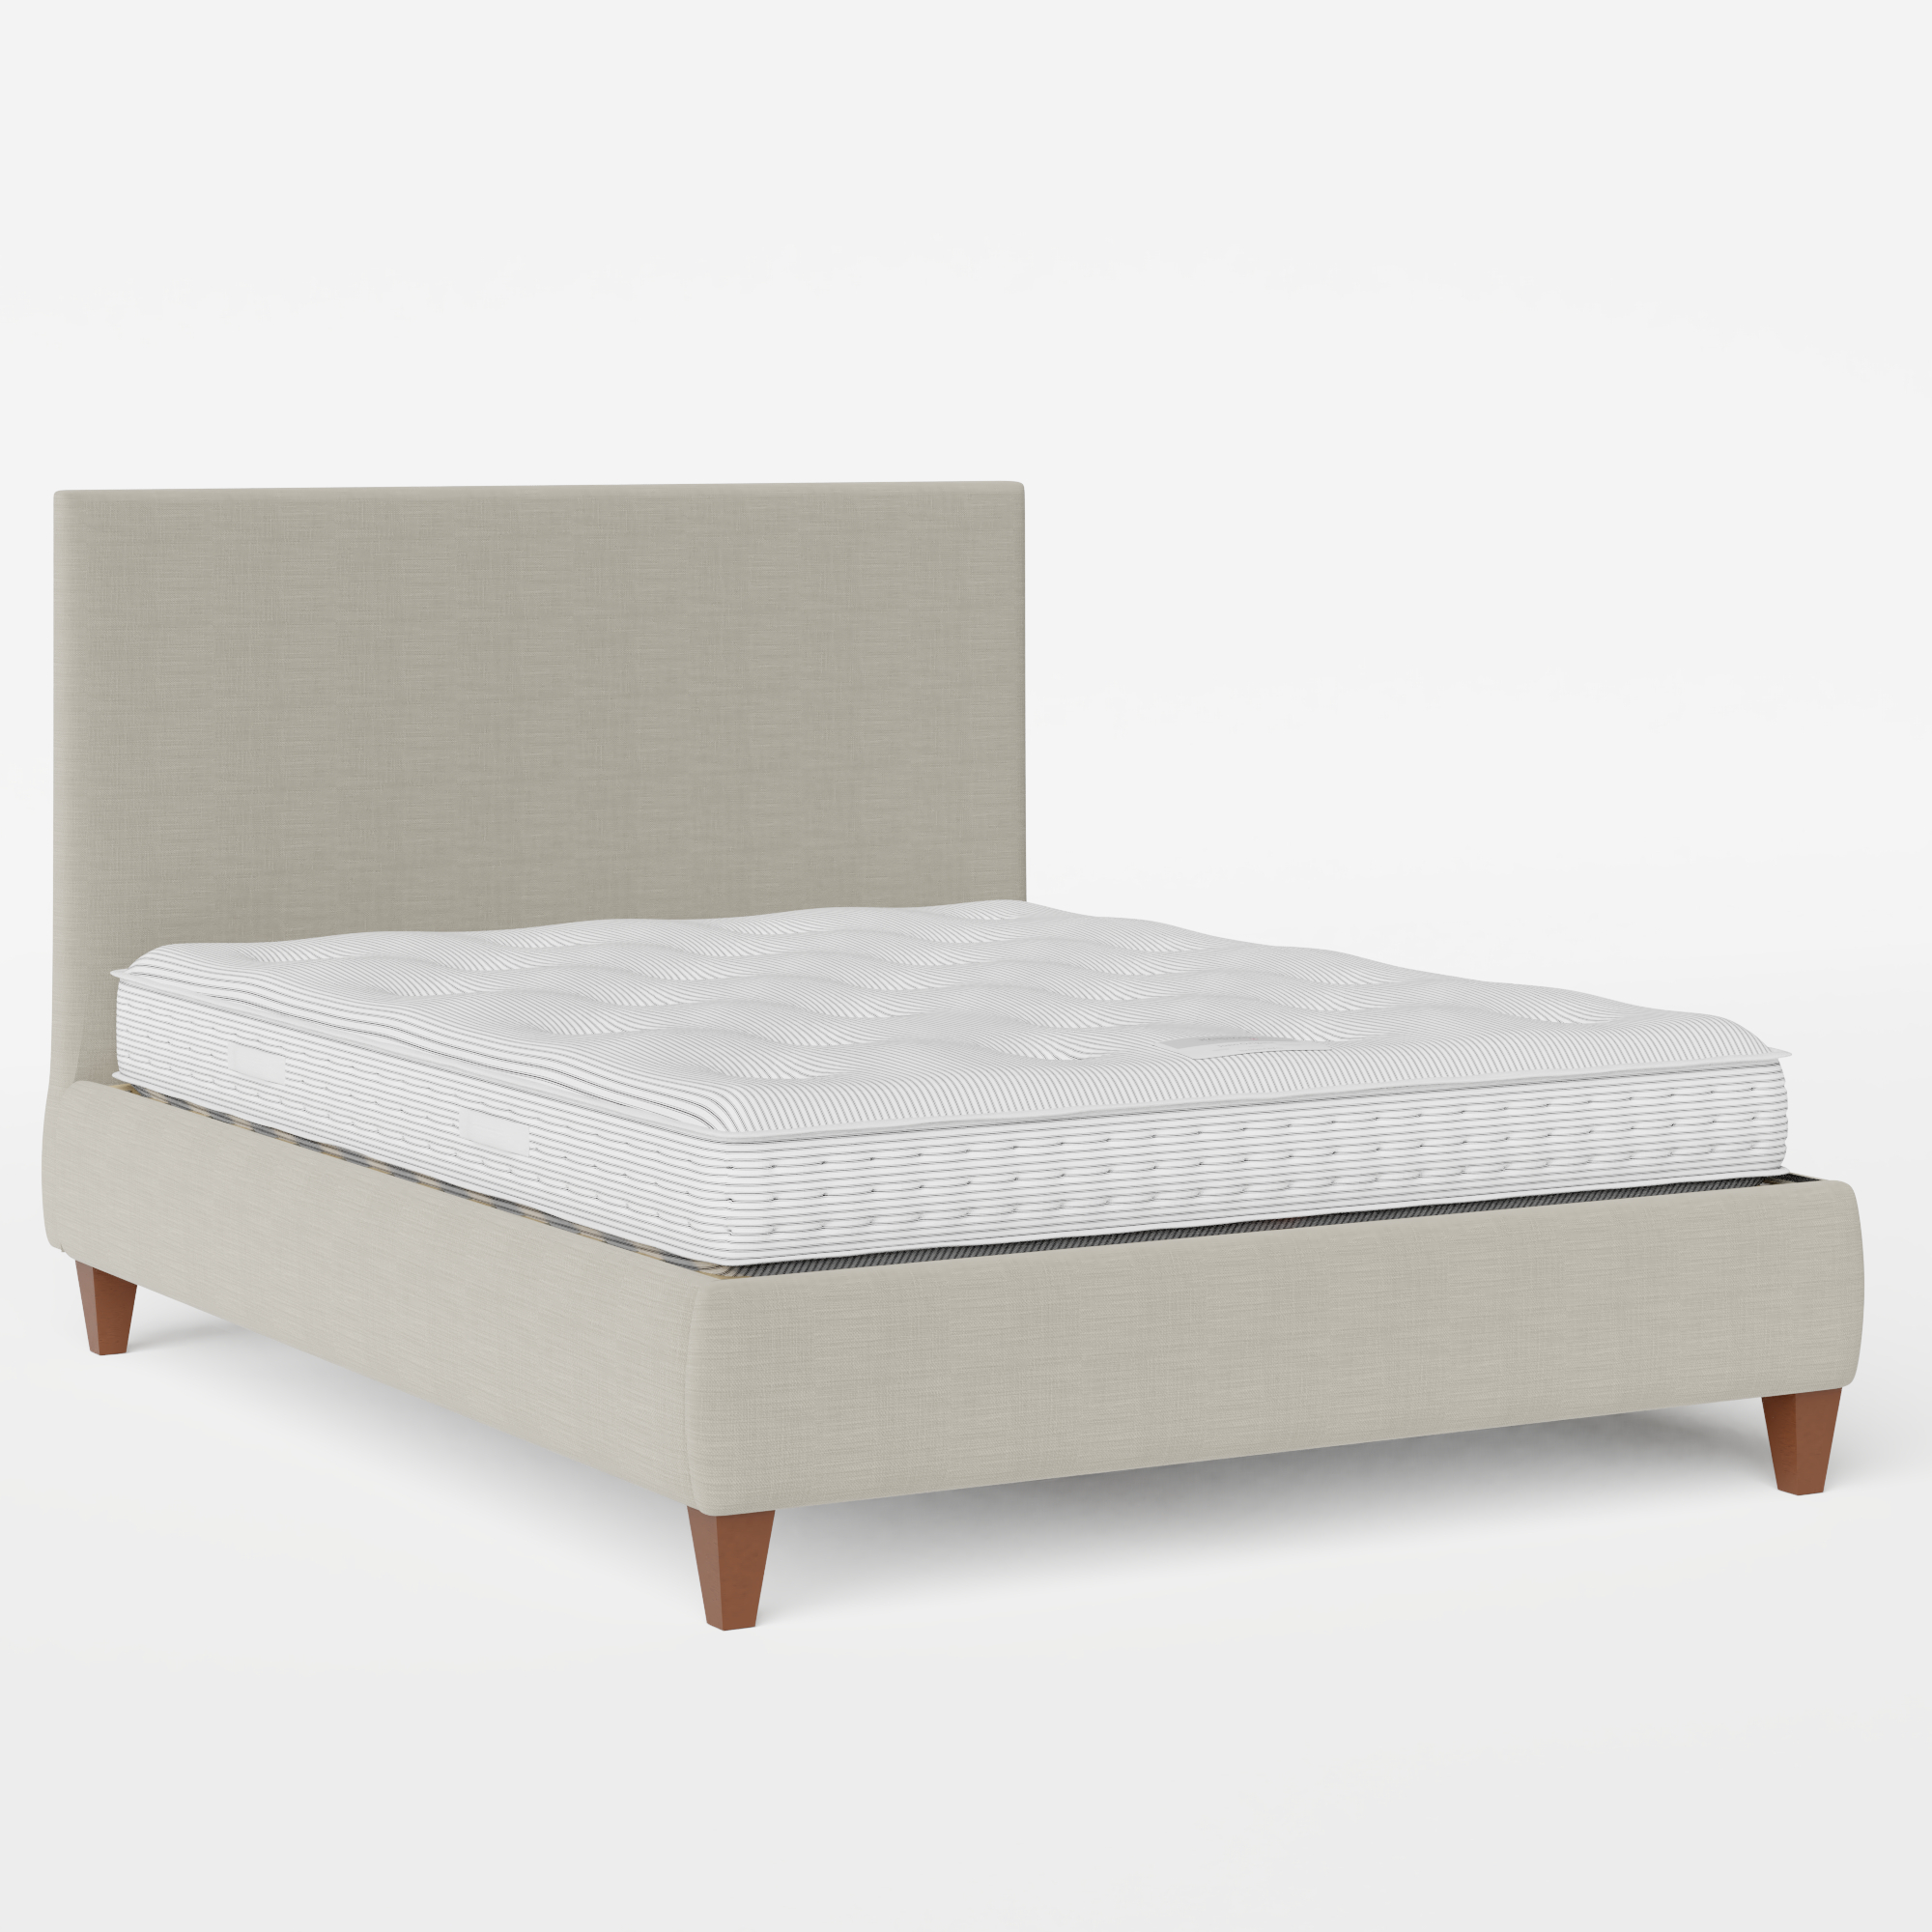 Yushan stoffen bed in grijs